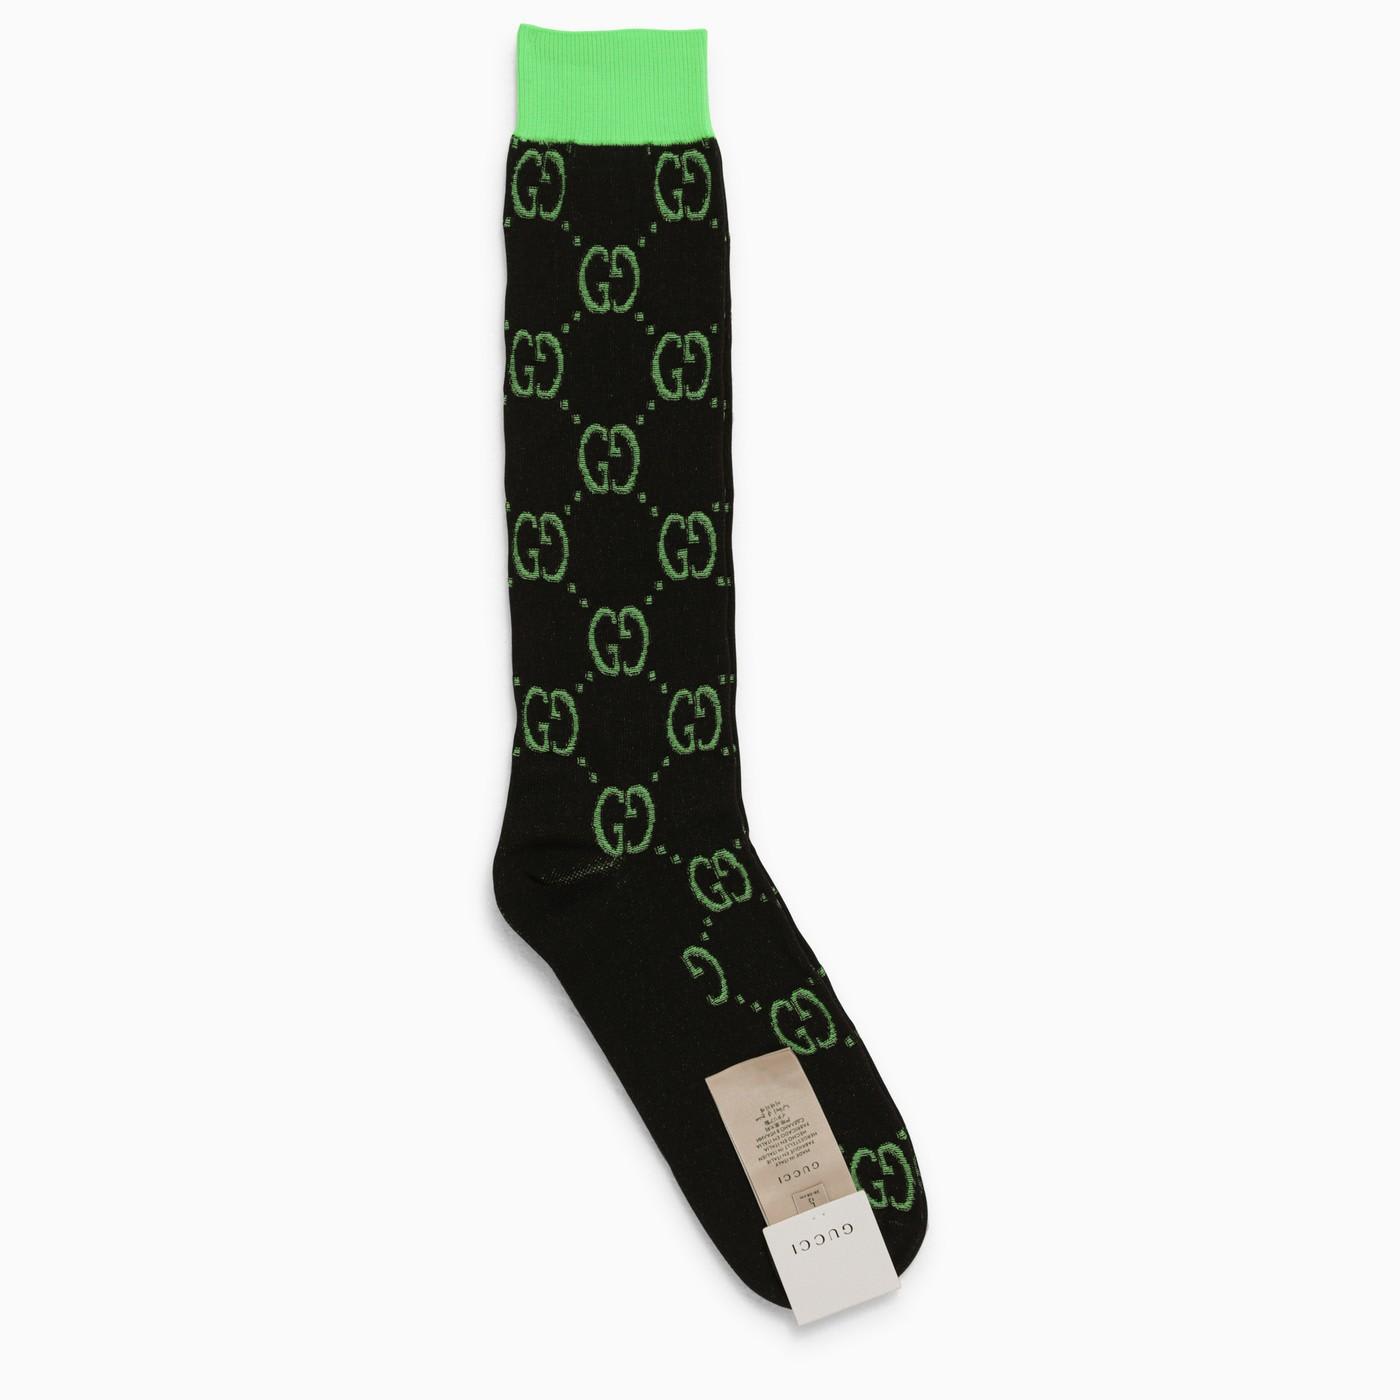 Black And Green Socks With Gg Motif